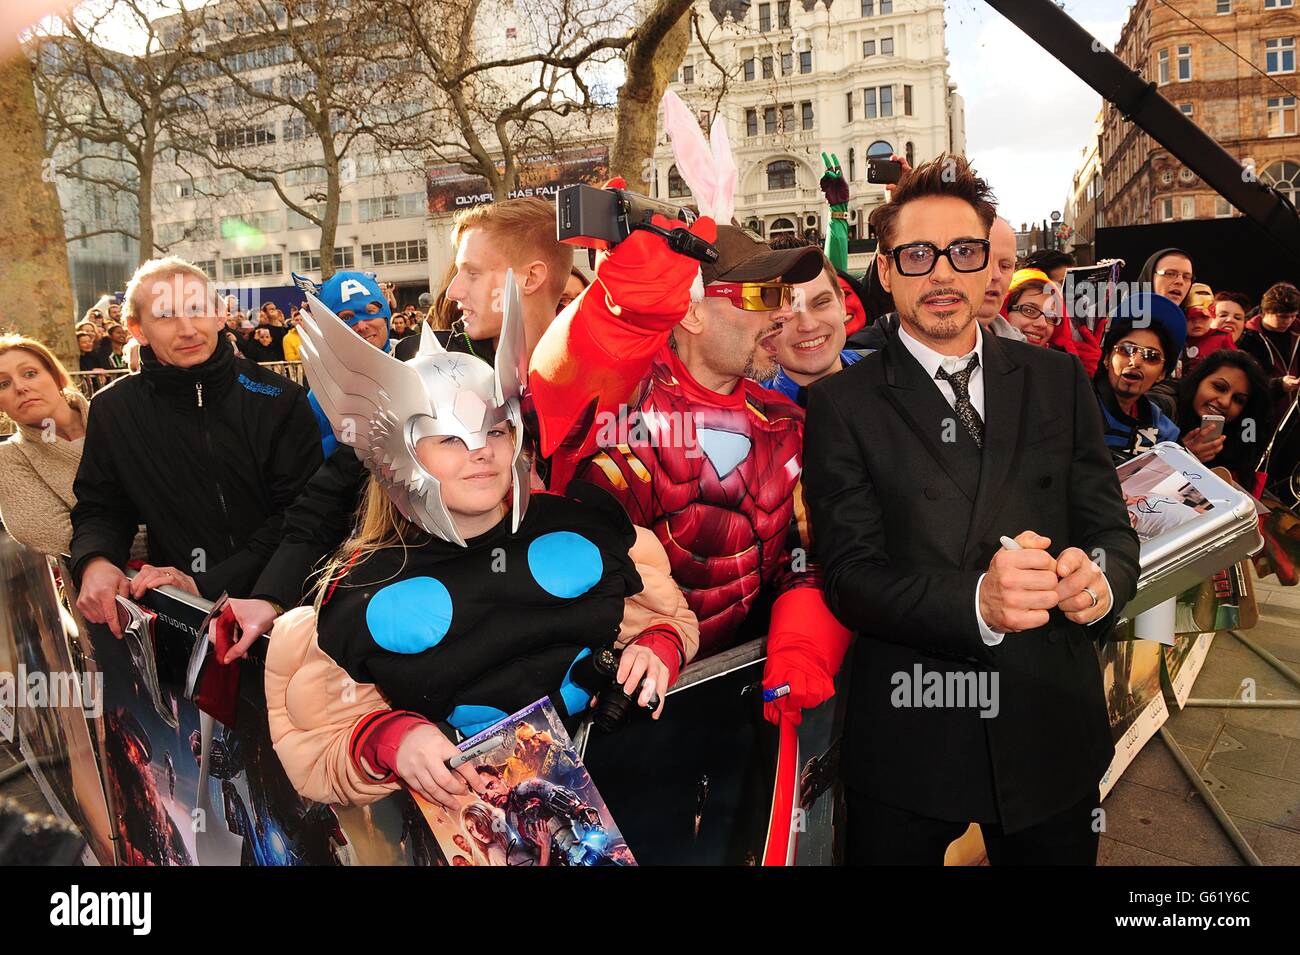 Iron Man 3 Premiere - London. Robert Downey Jr poses with fans at the premiere of Iron Man 3 at the Odeon Leicester Square, London. Stock Photo